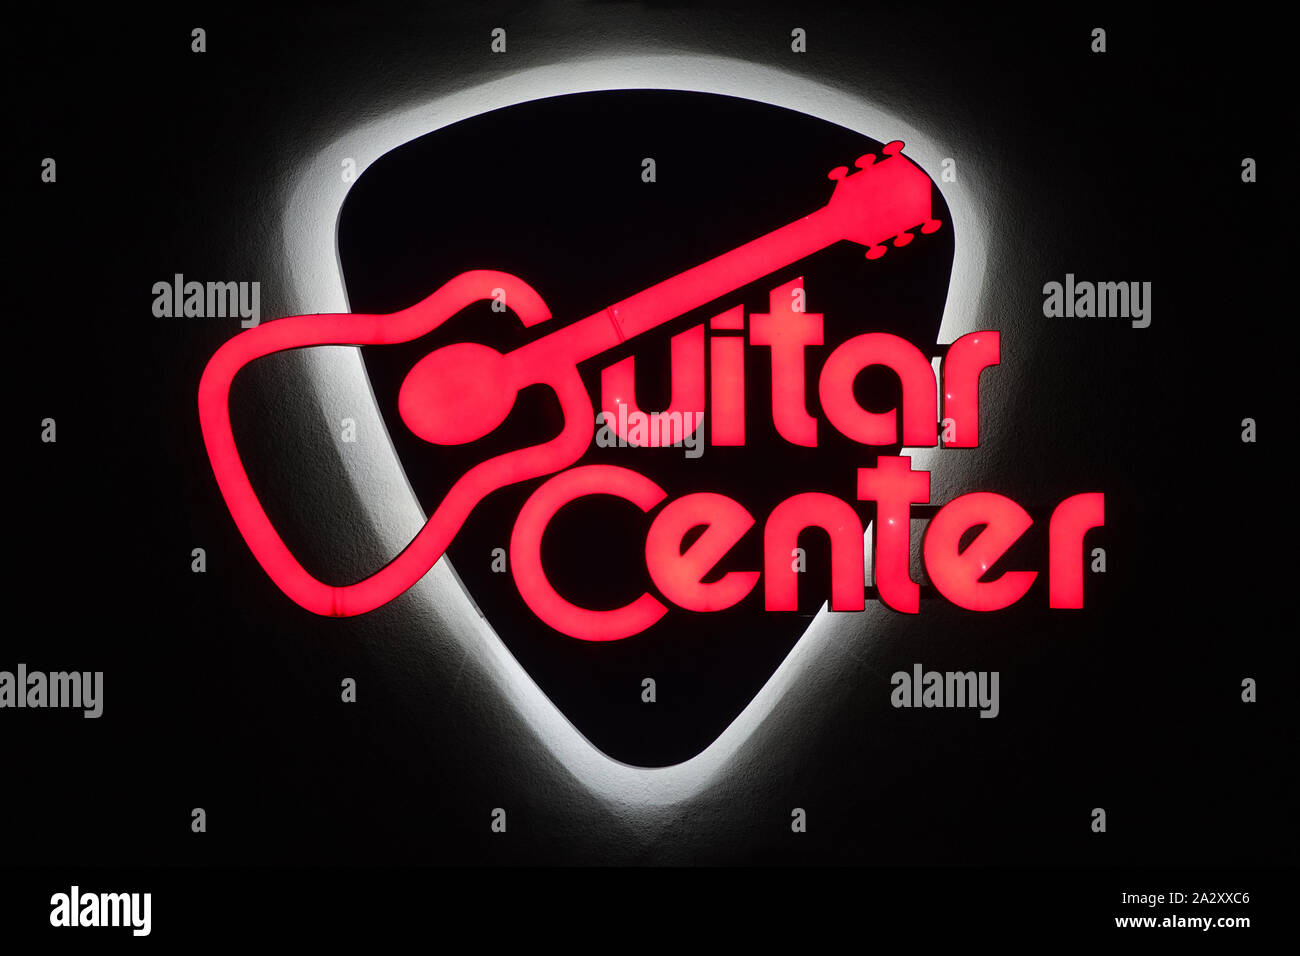 Santa Clarita, CA / USA - Oct. 1, 2019: A Guitar Center logo is shown illuminated at night on a storefront operated by the music equipment chain. Stock Photo